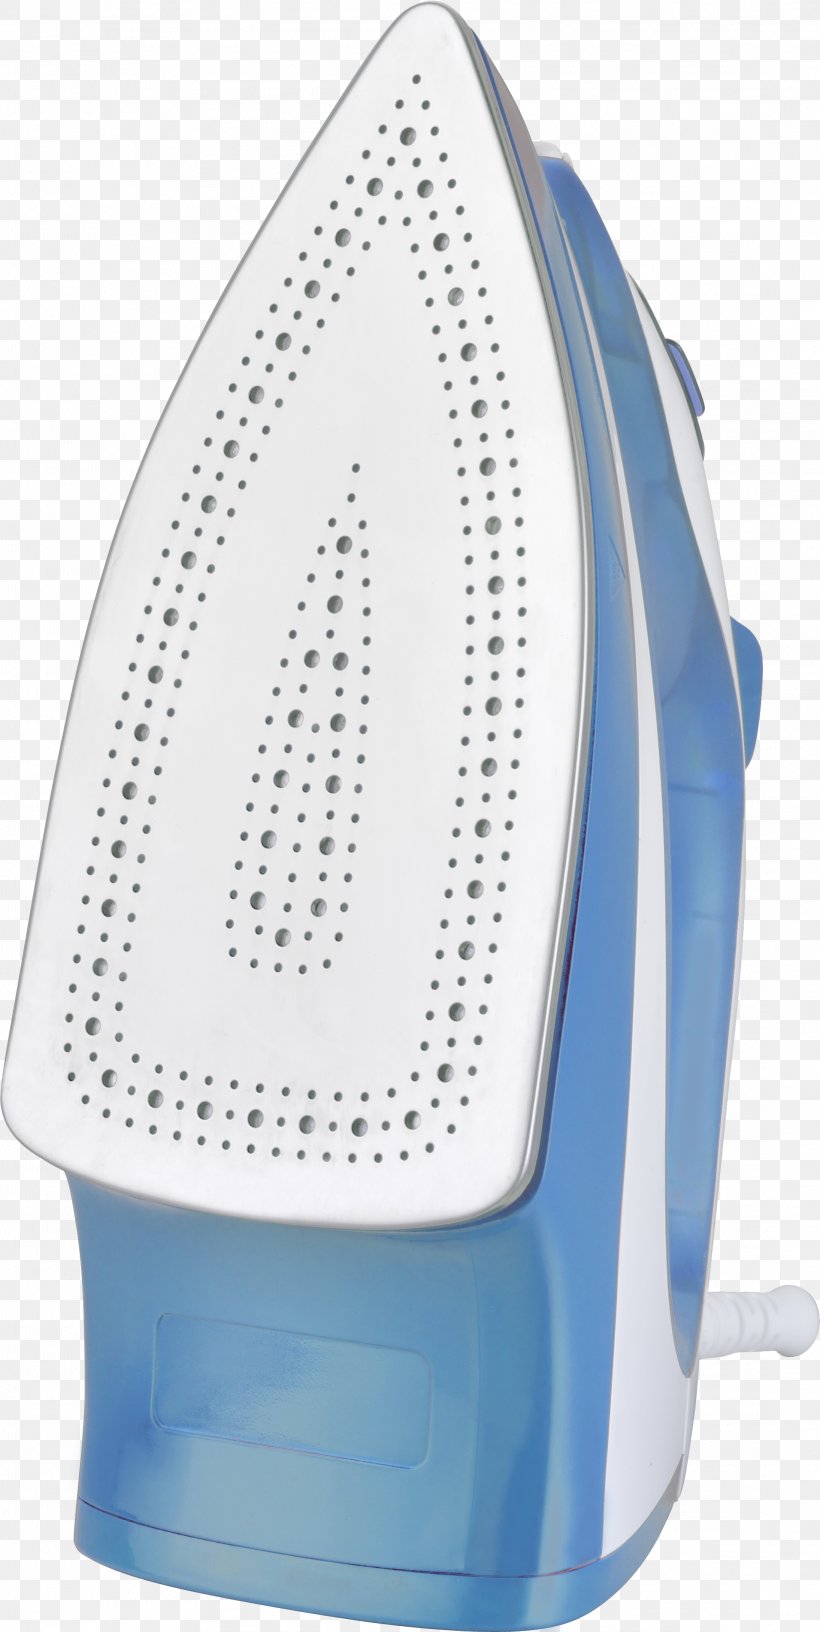 Clothes Iron Small Appliance Vapor Thermostat Steam, PNG, 2189x4357px, Clothes Iron, Electric Blue, Function, Help, Home Appliance Download Free